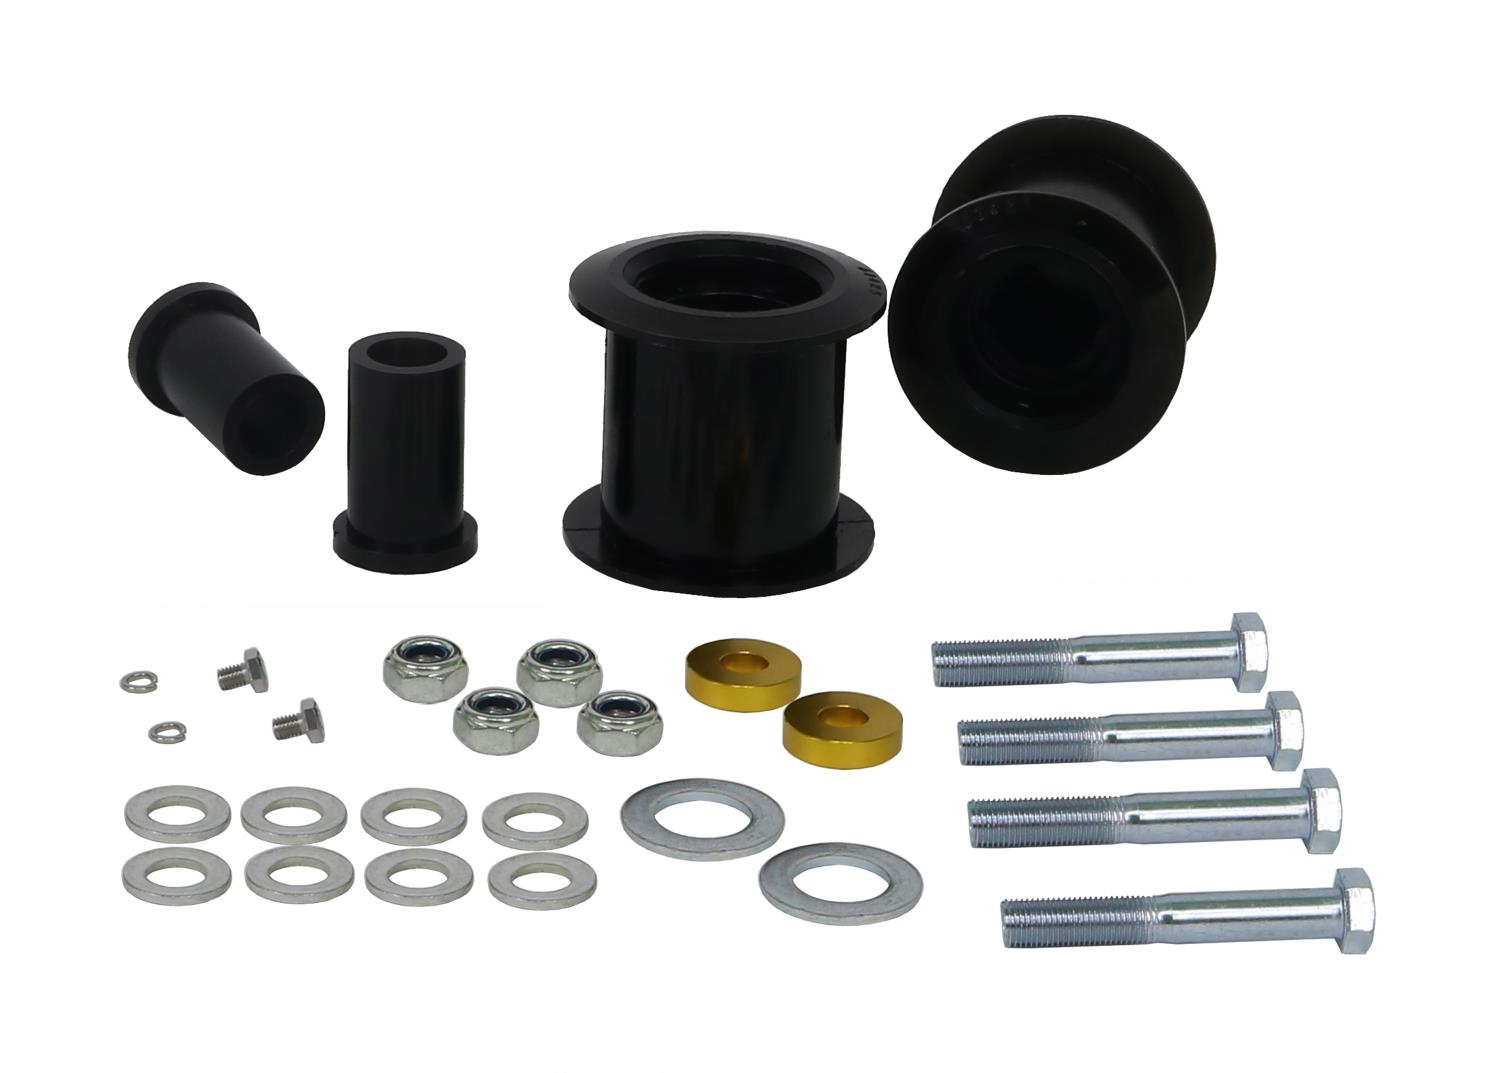 KCA428 Front Anti-Lift/Caster Control Arm Lower Inner Rear Bushing Fits Select 2004-2013 Mazda, Volvo Models